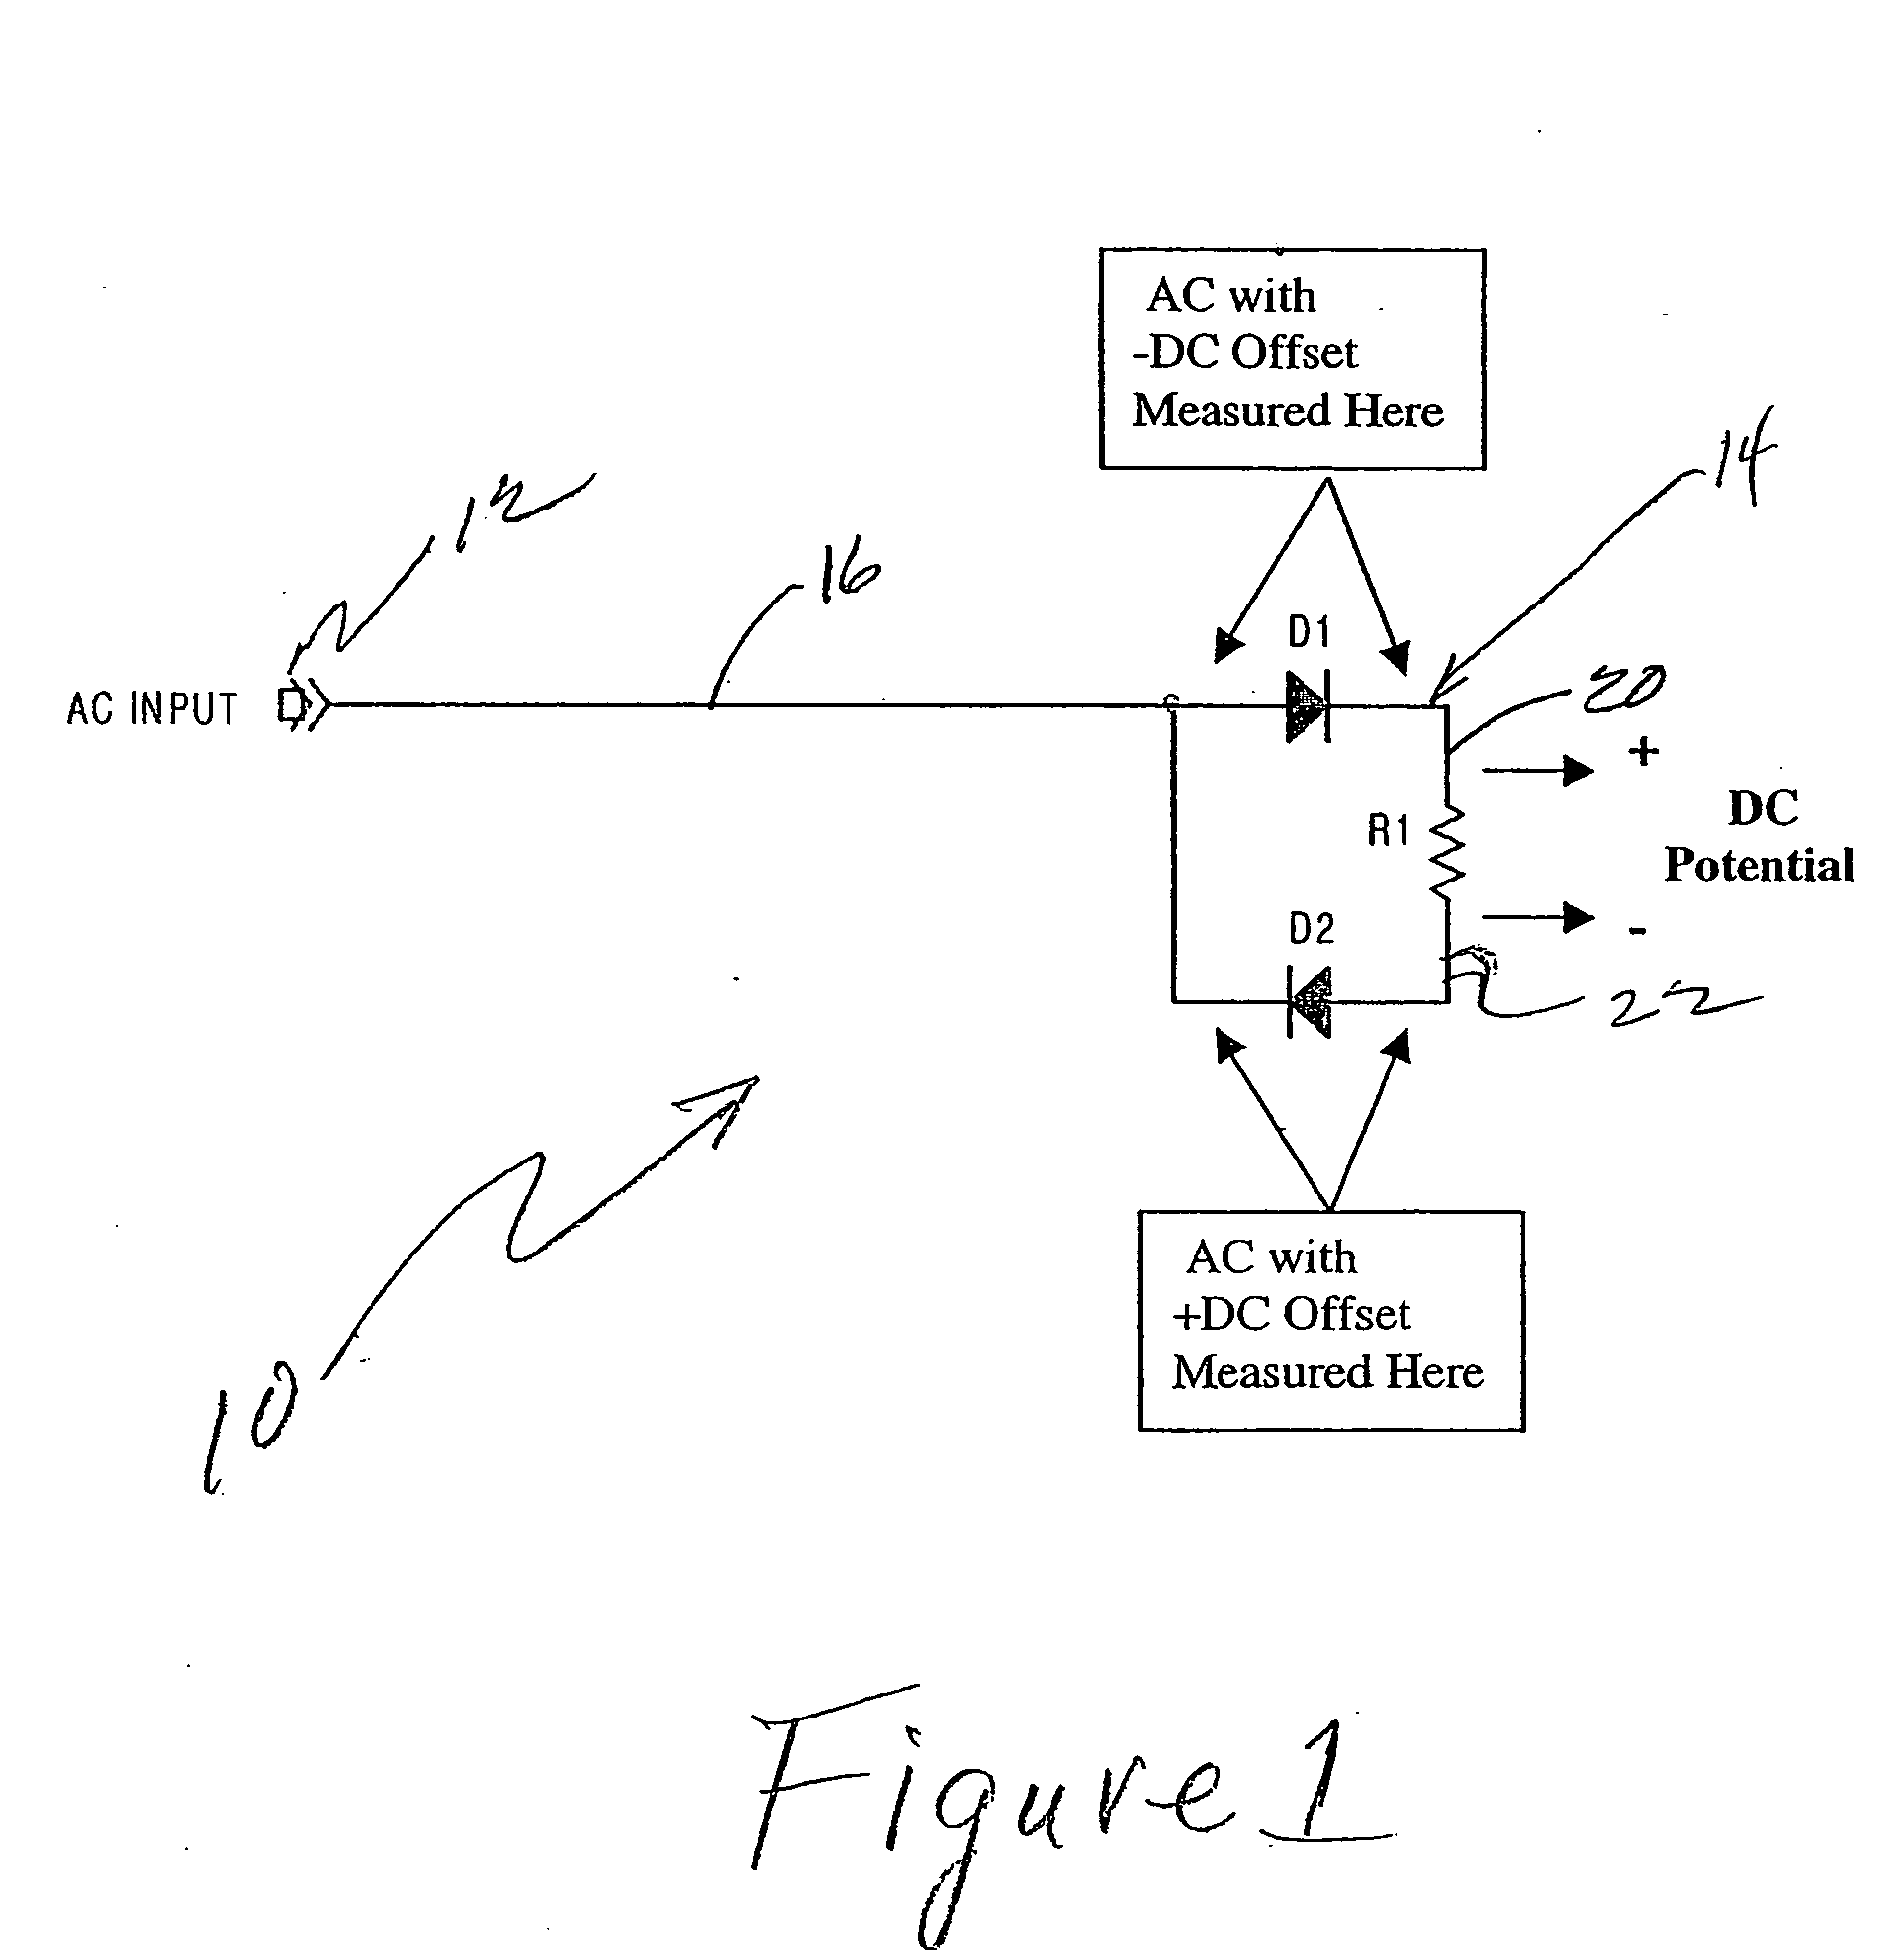 One wire self referencing circuits for providing power and data